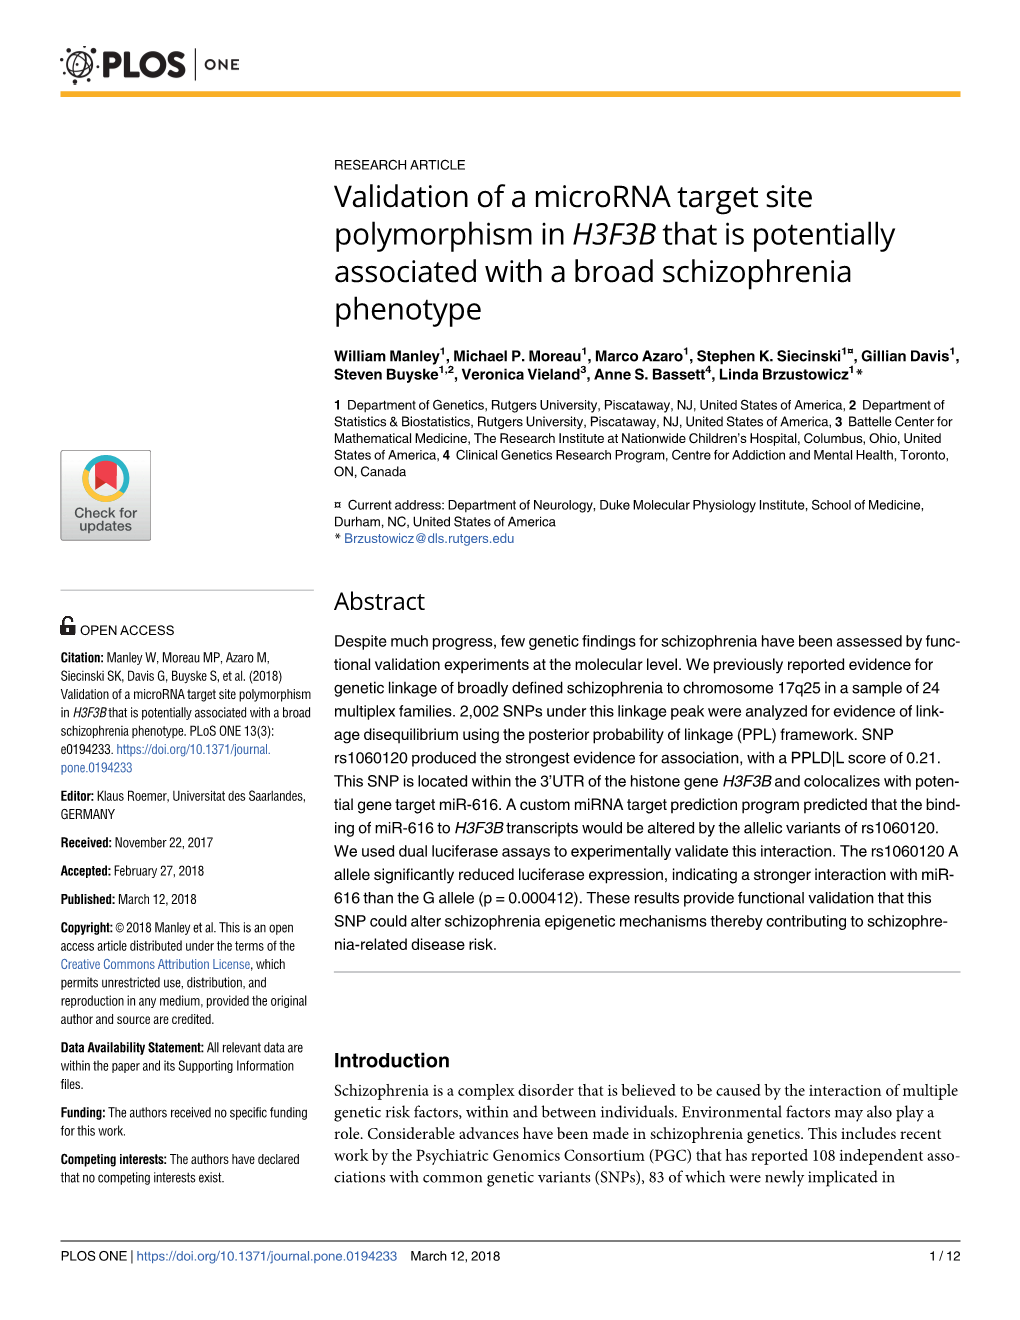 Validation of a Microrna Target Site Polymorphism in H3F3B That Is Potentially Associated with a Broad Schizophrenia Phenotype